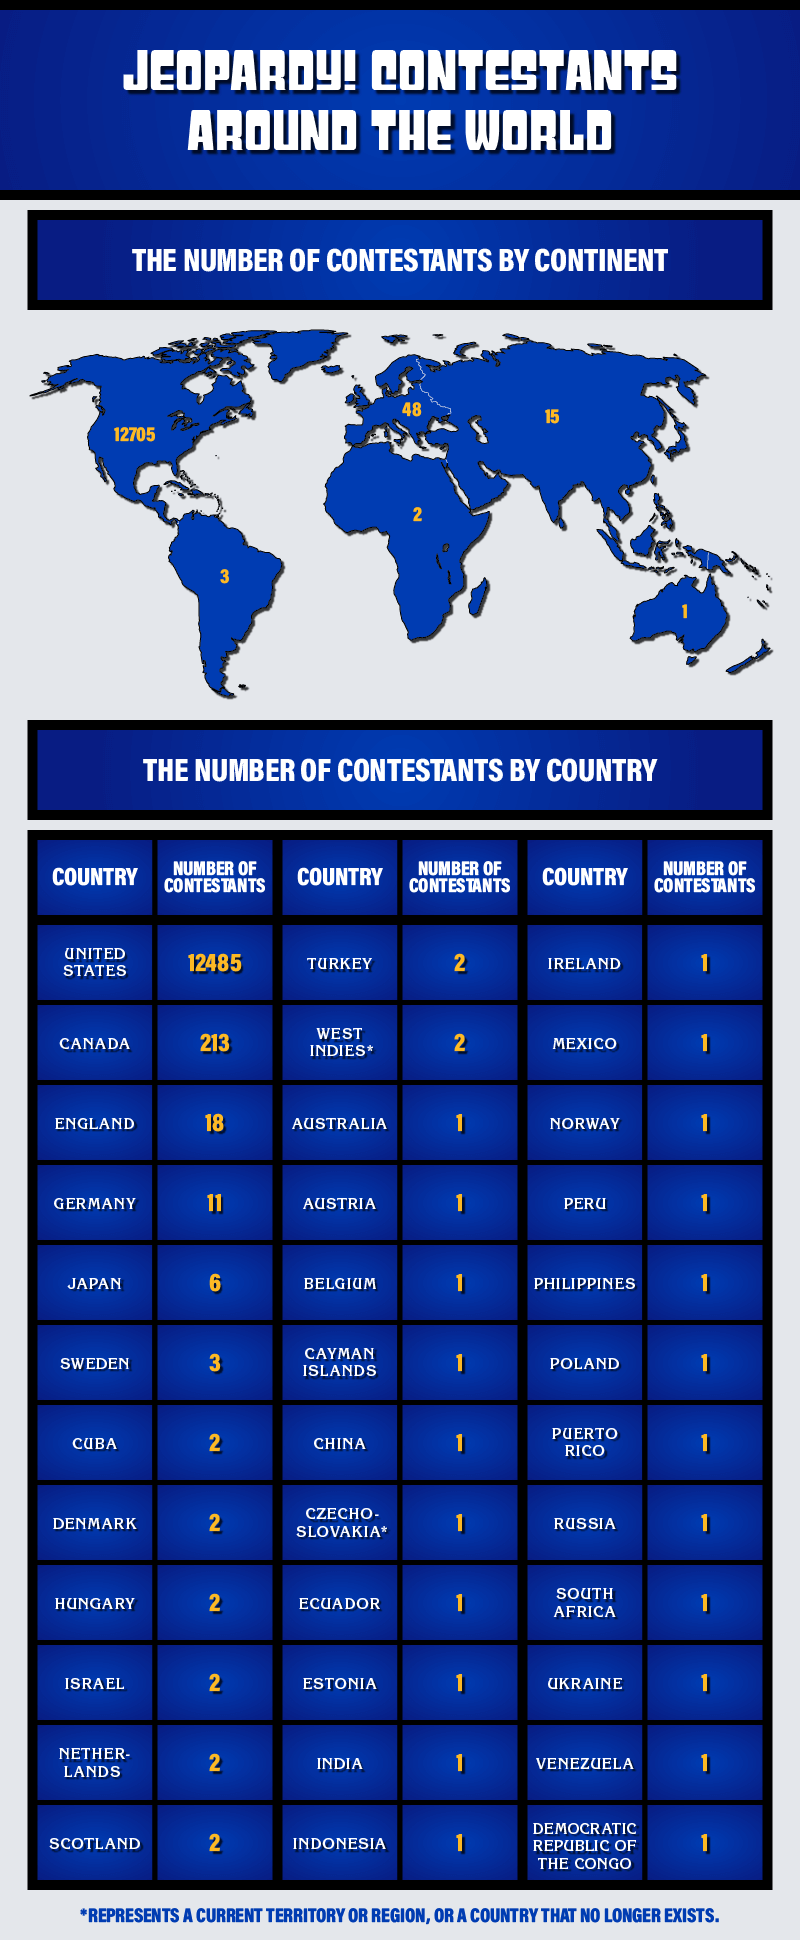 Chart showing the number of Jeopardy! contestants by country